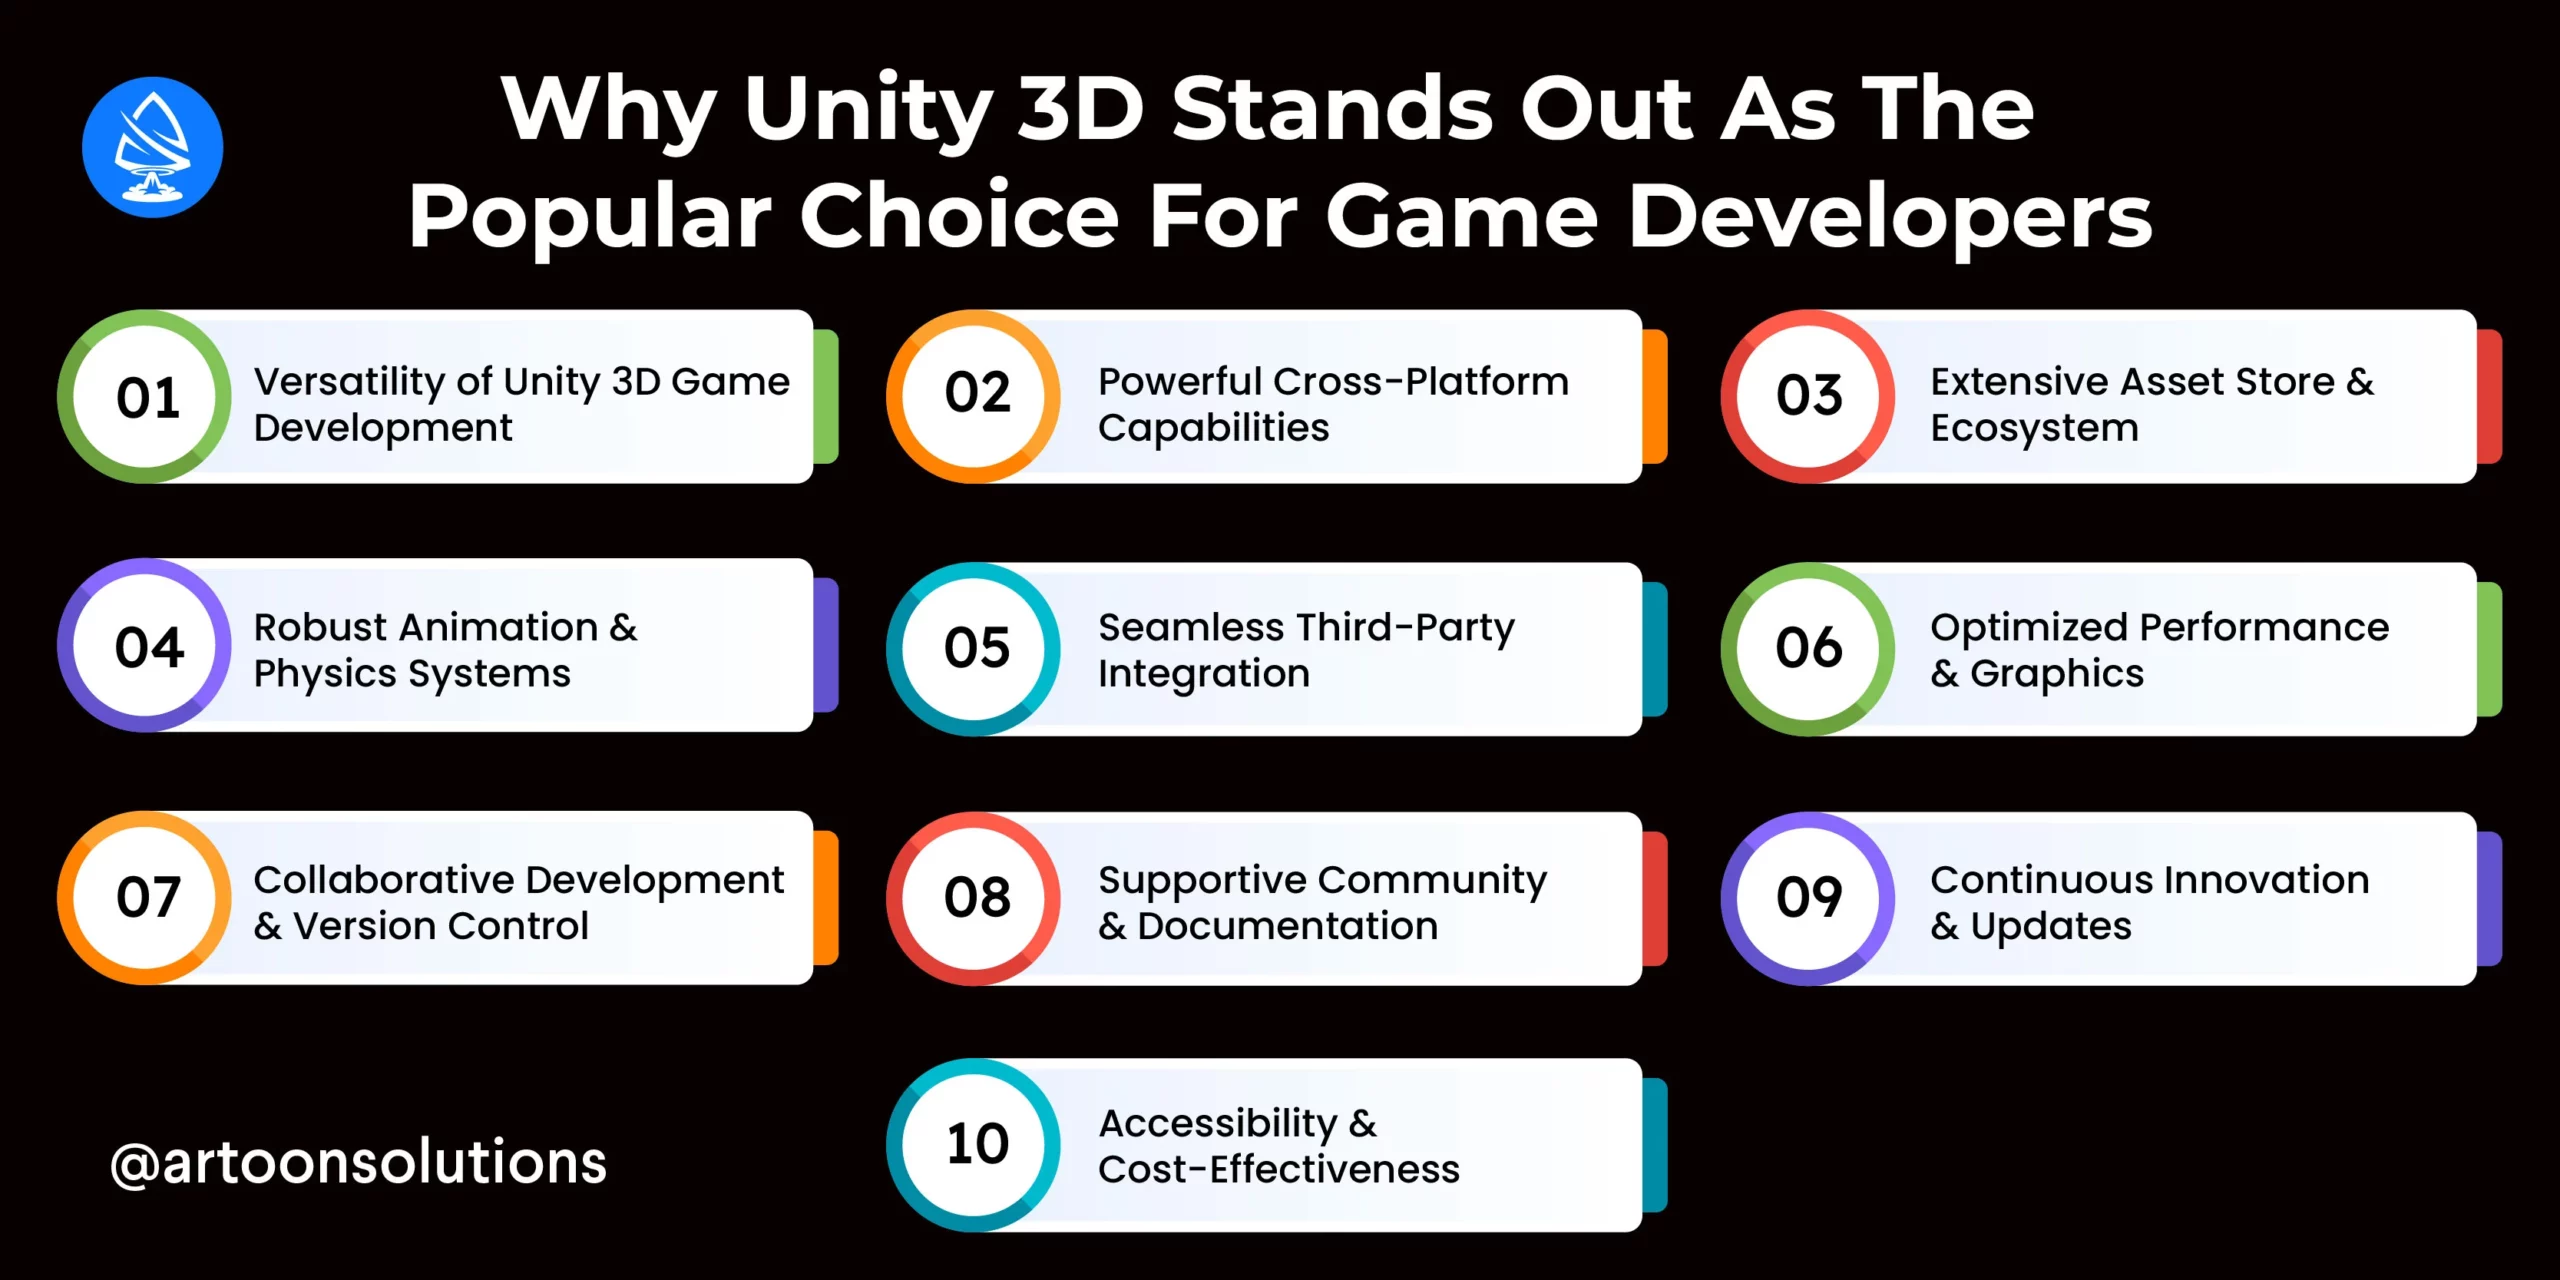 Why Unity 3D Stands Out As The Popular Choice For Game Developers 